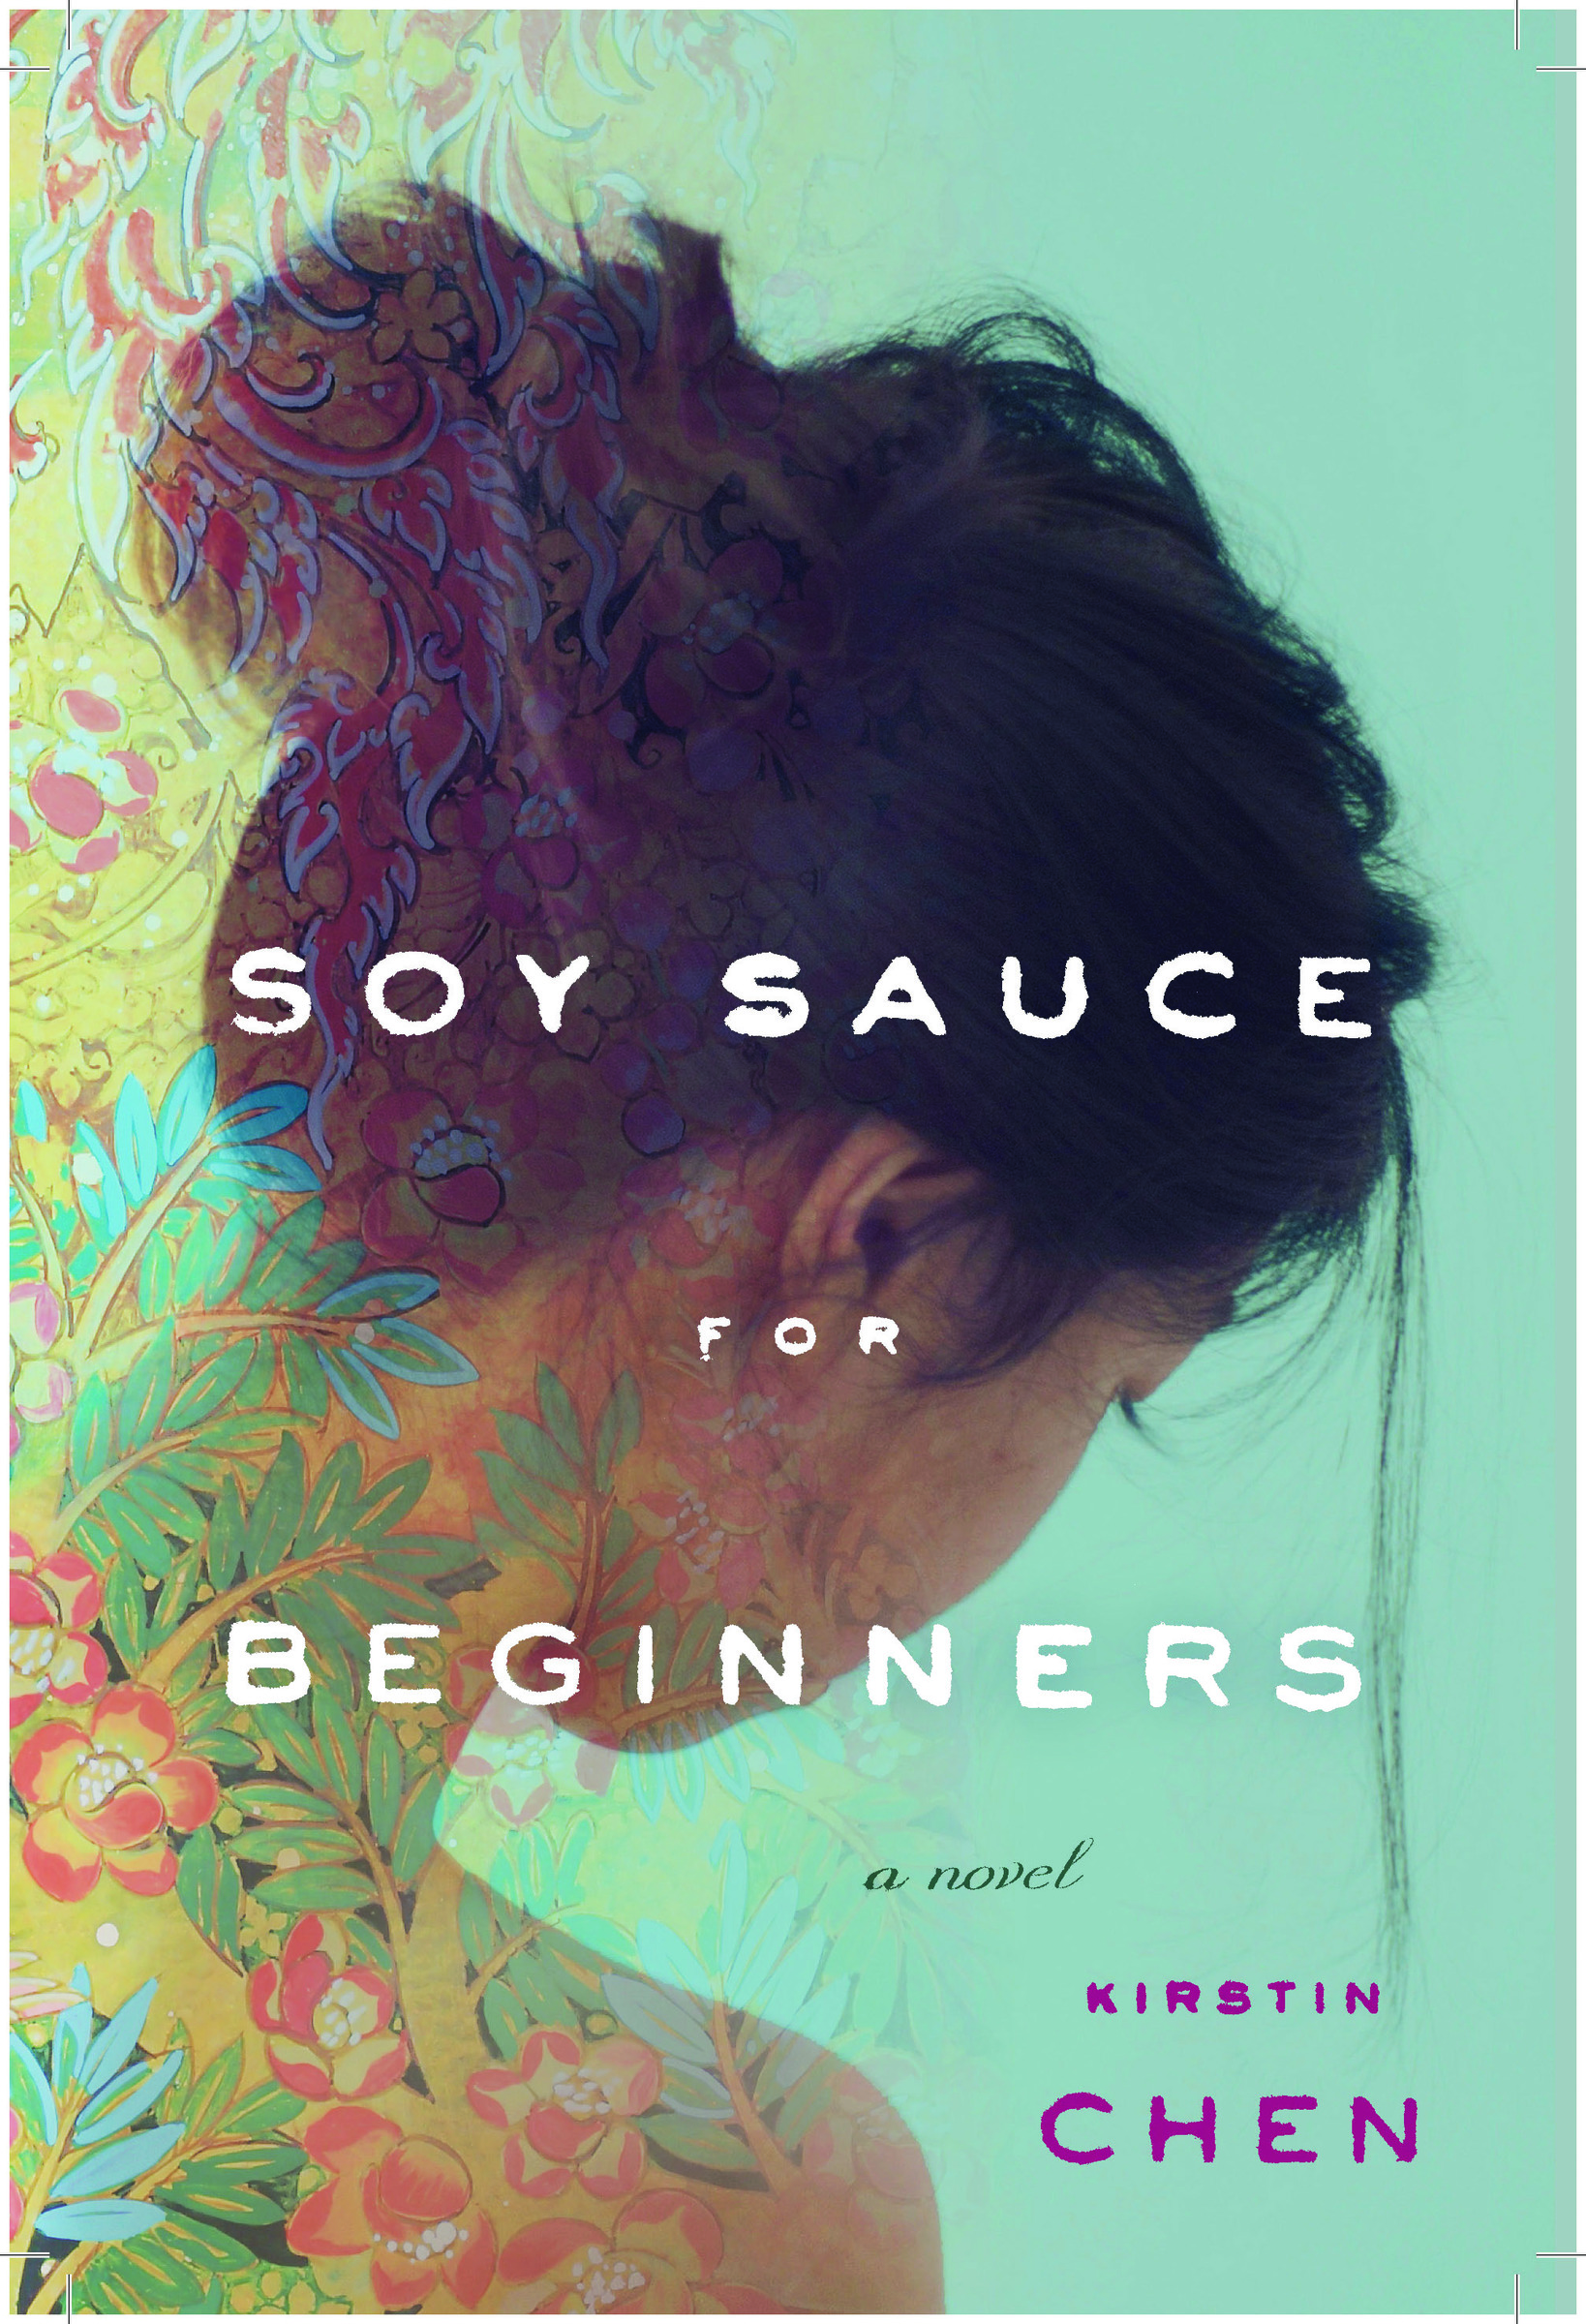 SOY-SAUCE-FOR-BEGINNERS-Final-Cover-For-Galleys.jpg